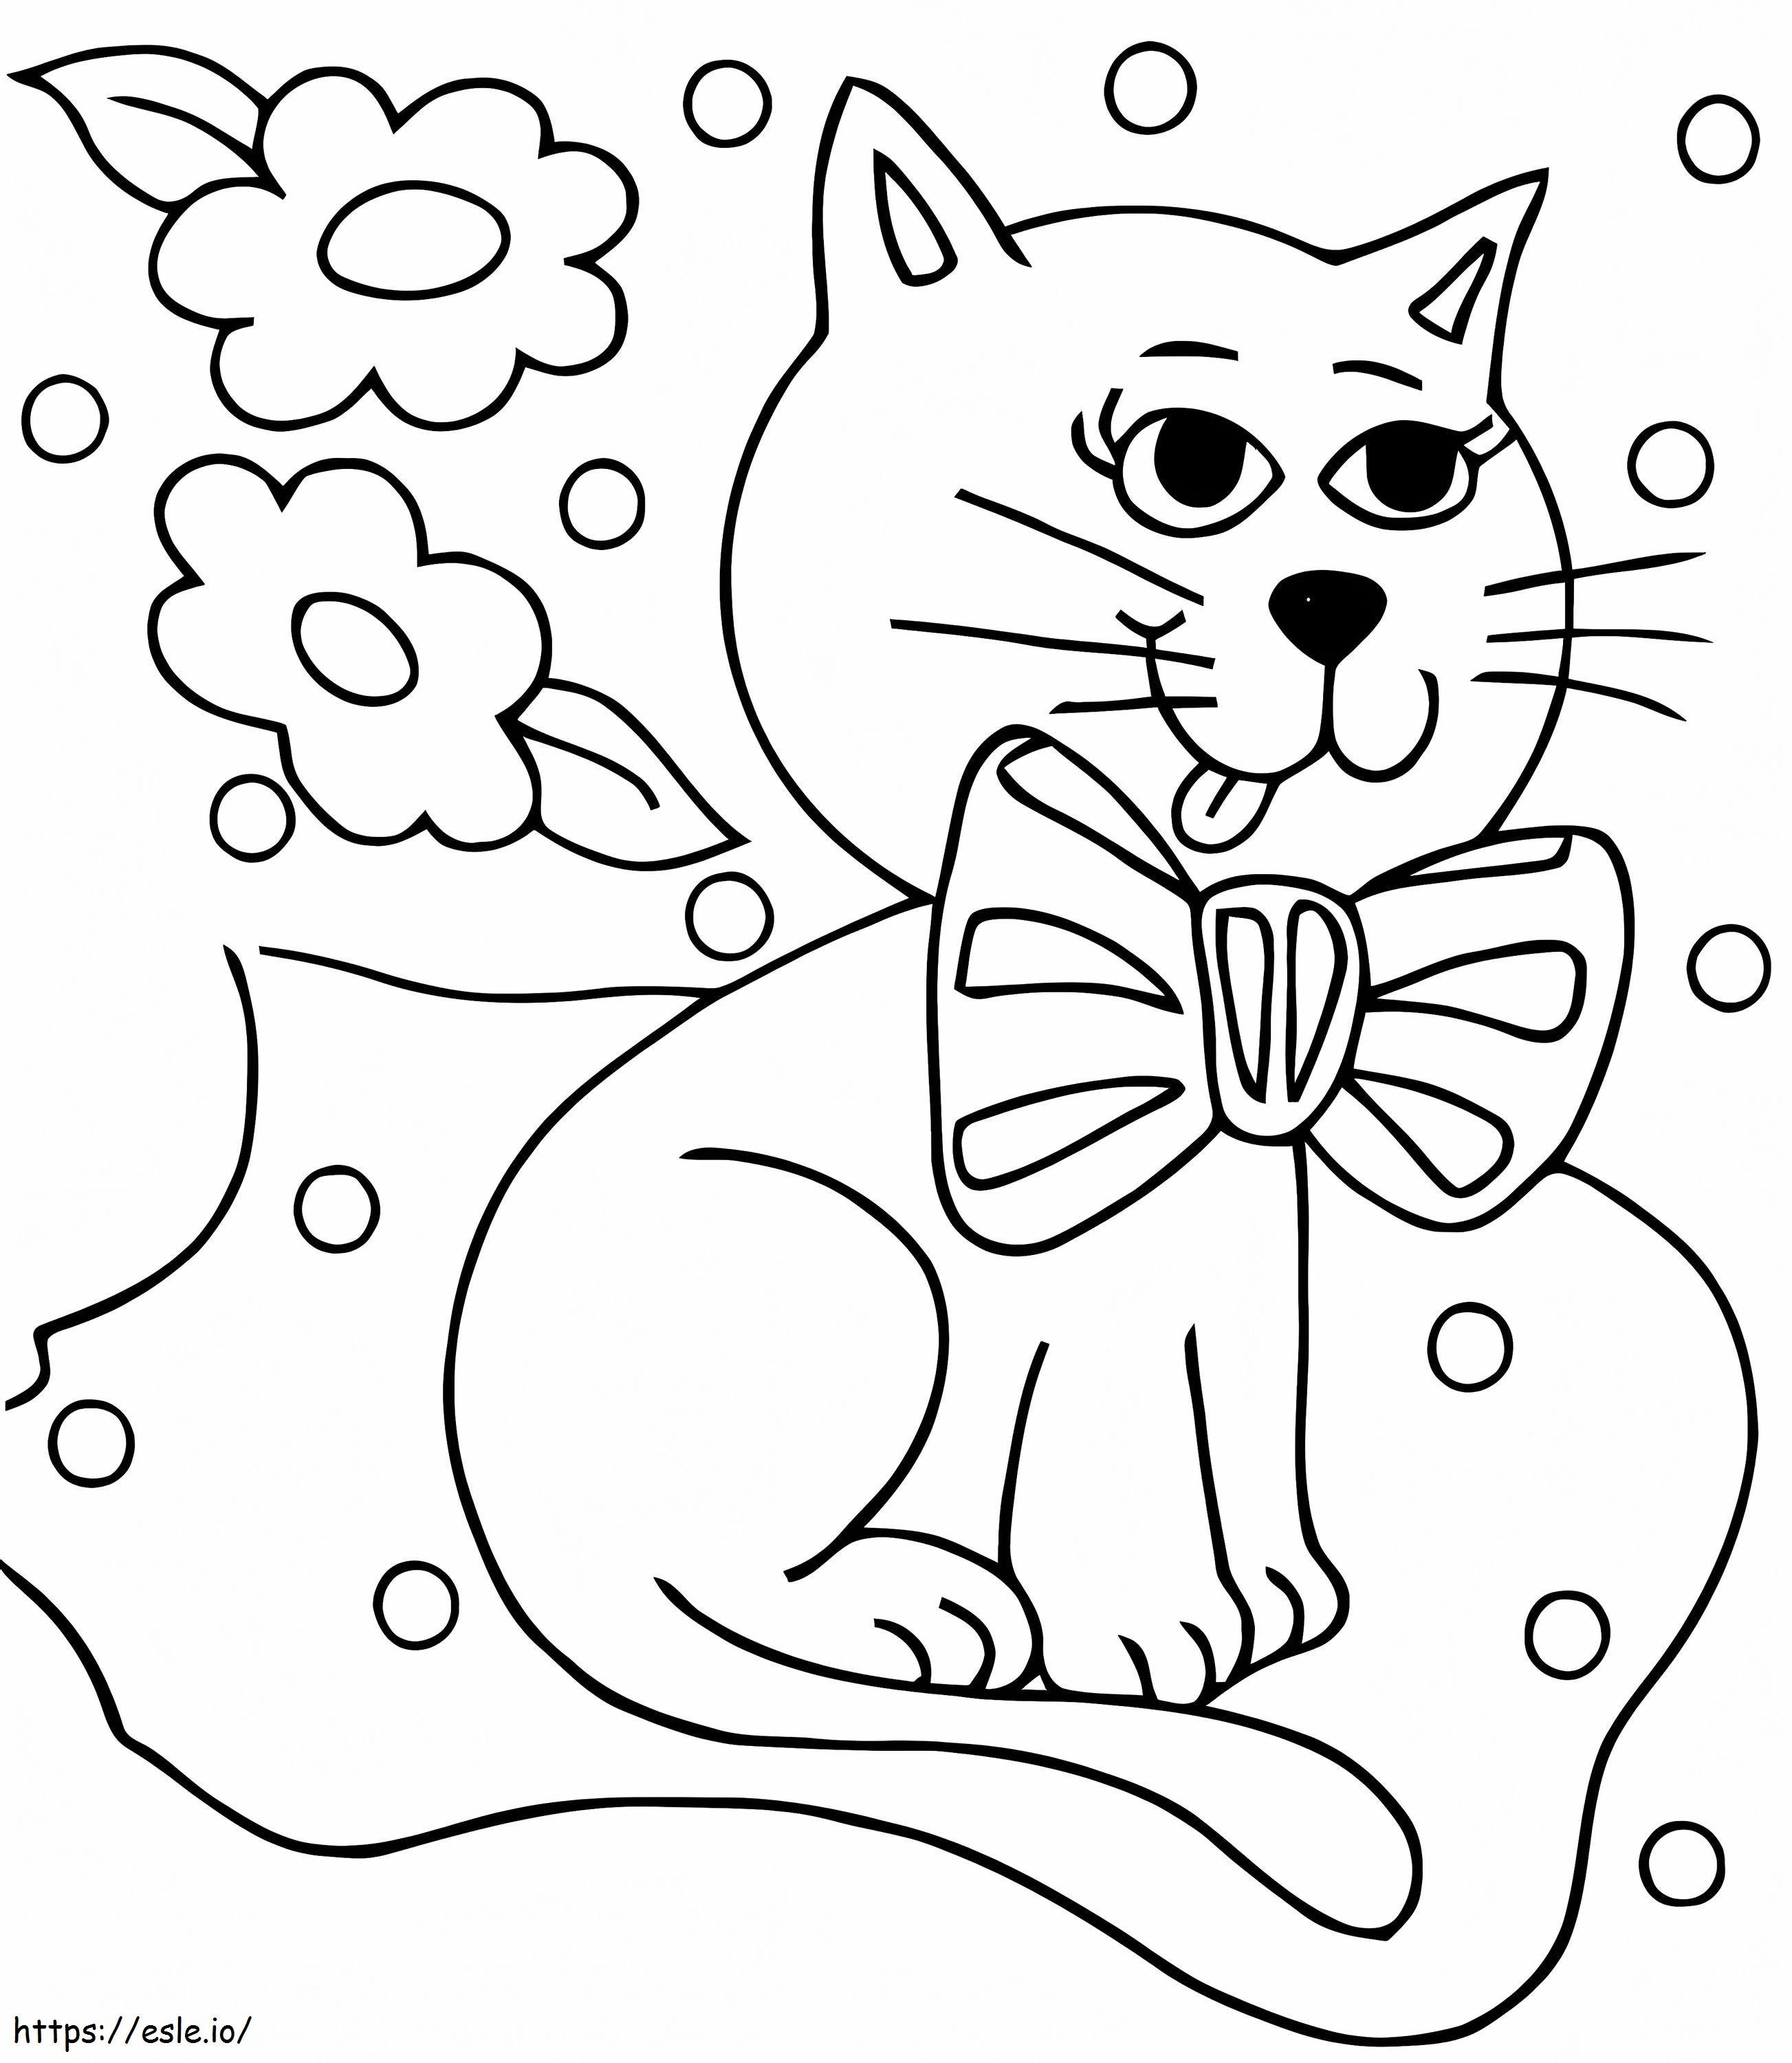 Cute Cat 1 coloring page